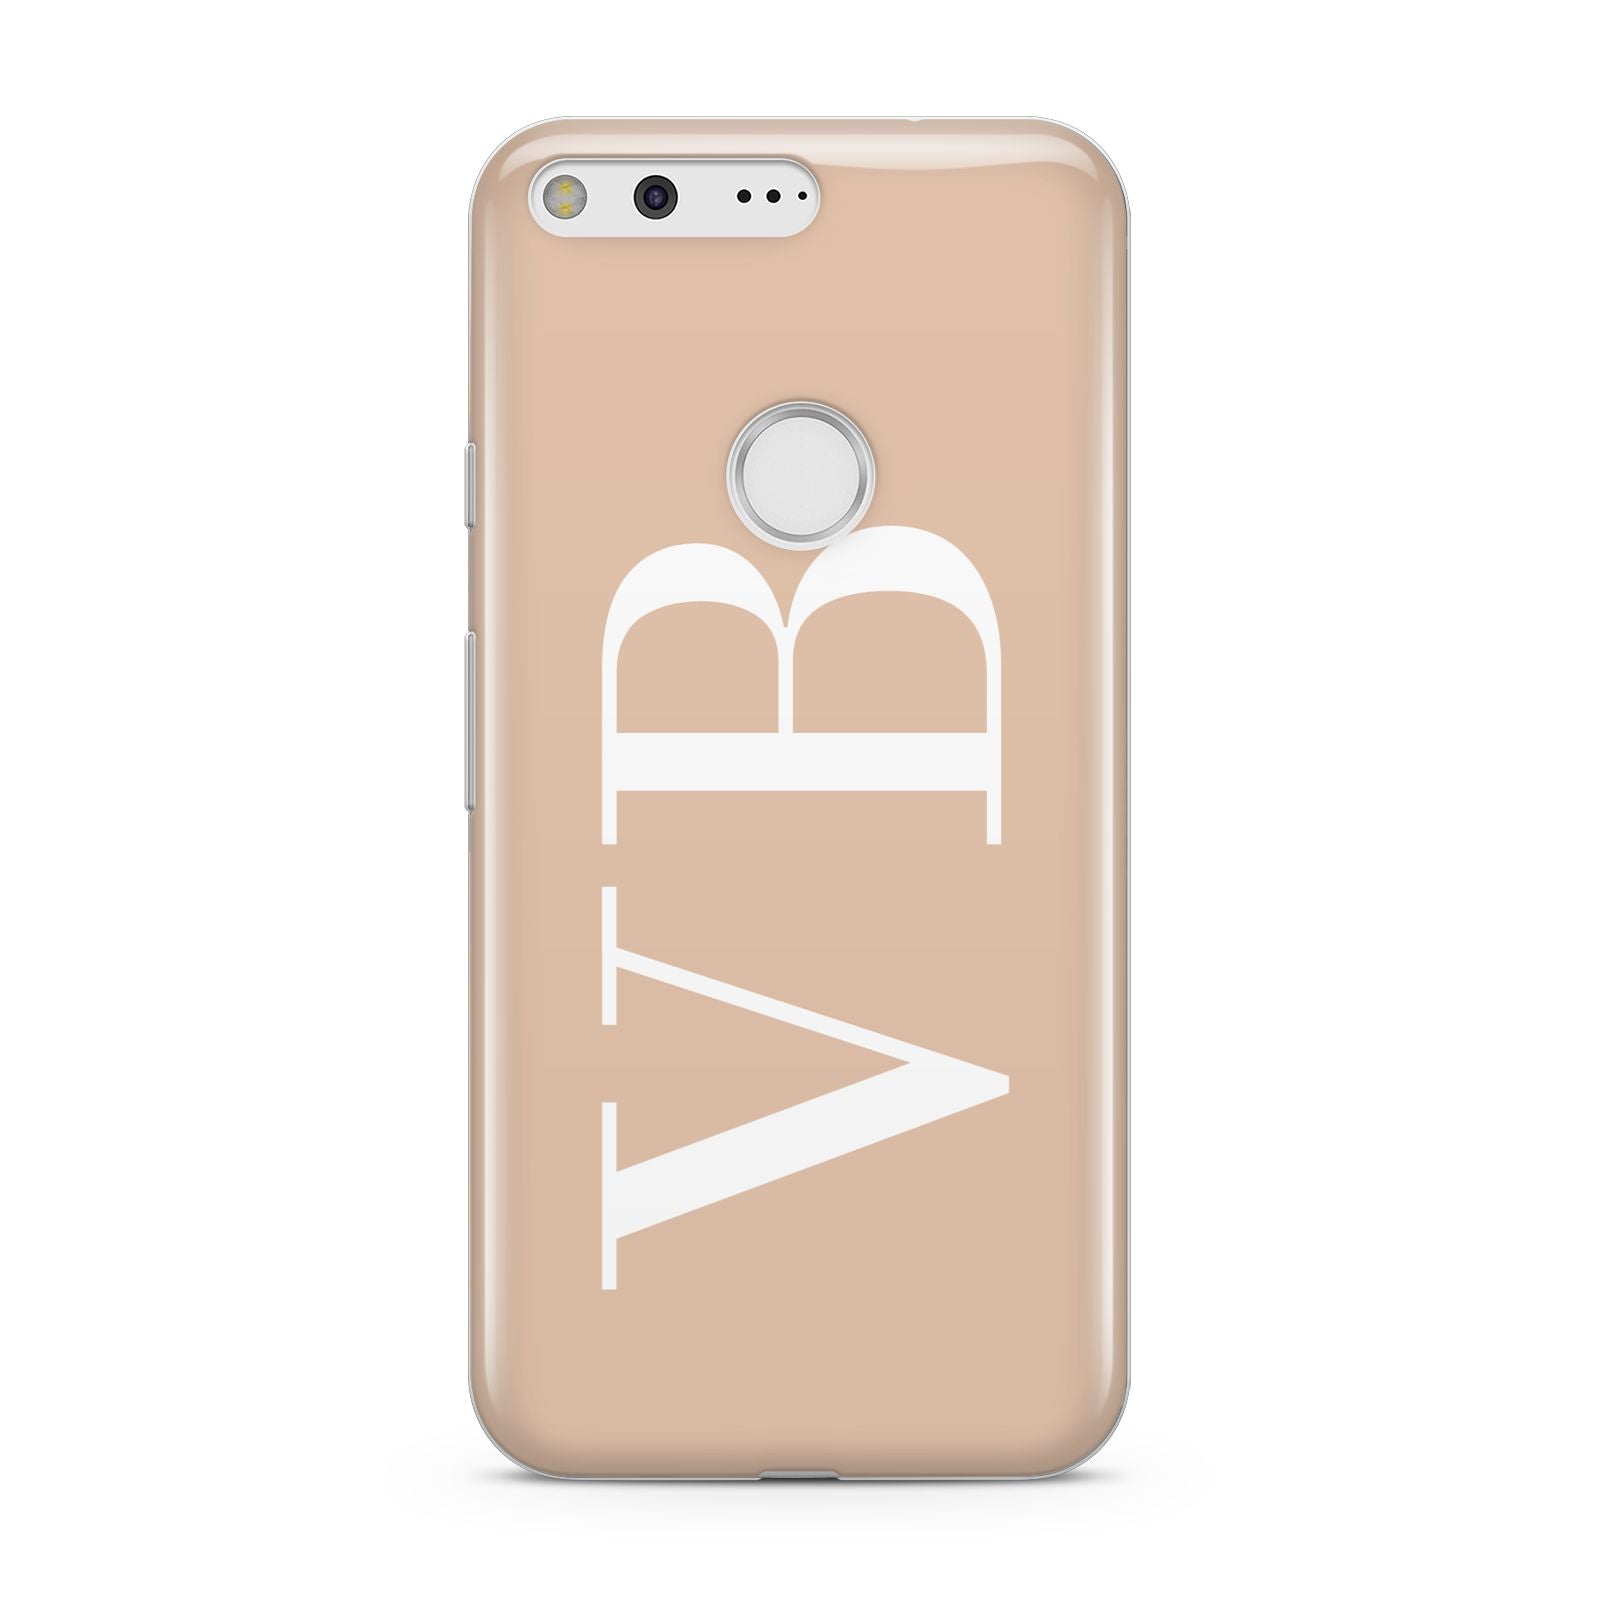 Nude And White Personalised Google Pixel Case